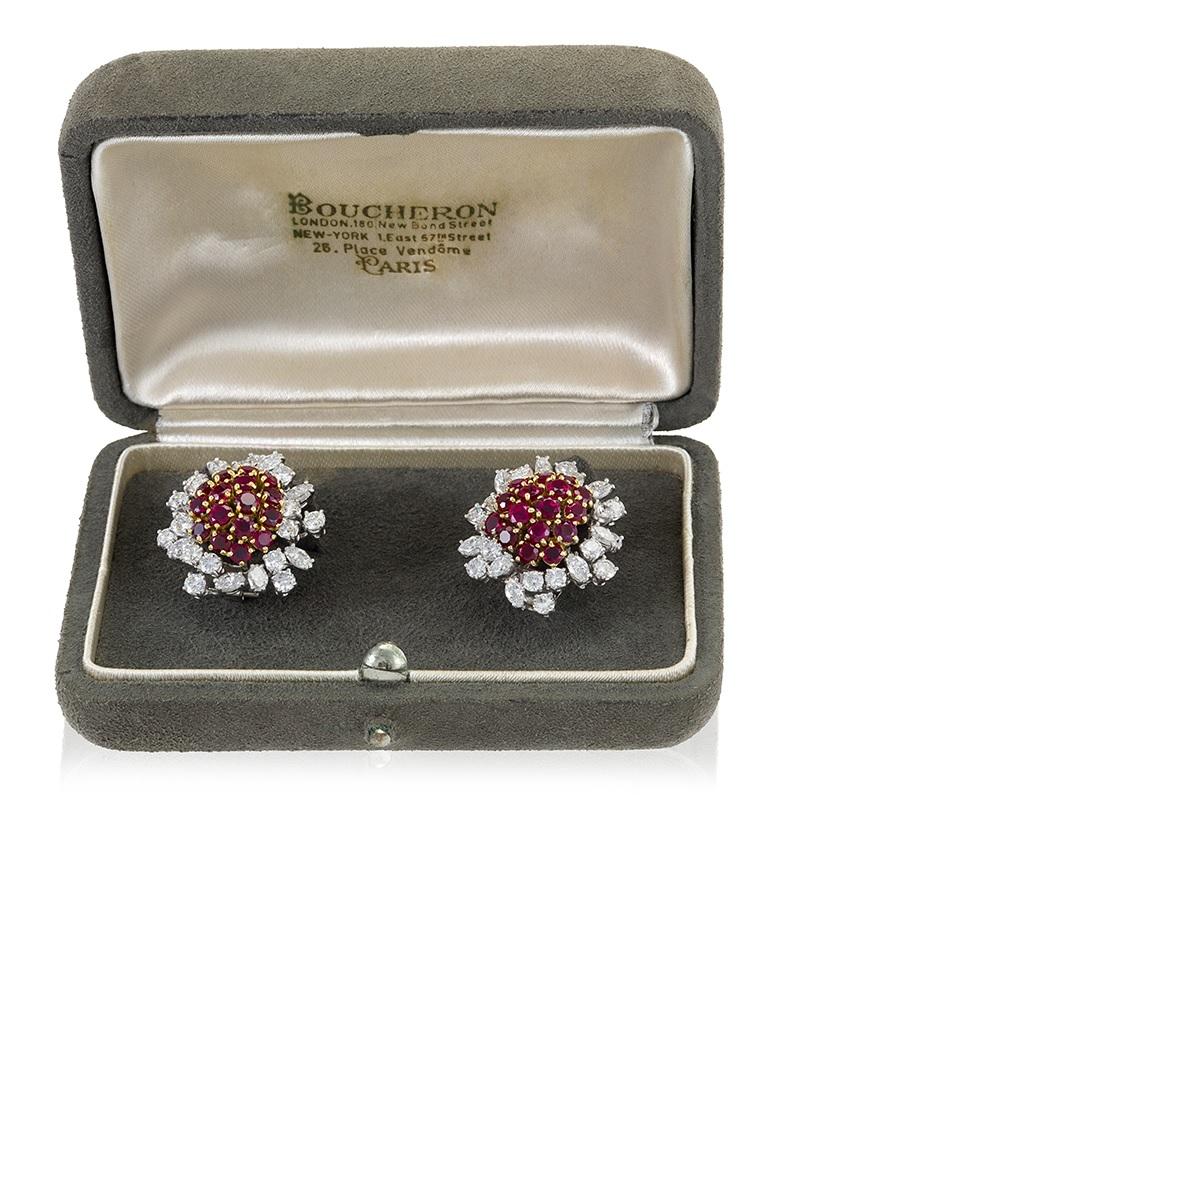 A pair of platinum- and gold-set diamond and ruby earrings by Boucheron. The earrings, housed in their original box from the mid-20th century, center on a semicircular raised cluster of 32 remarkably well matched rubies, total approximate weight